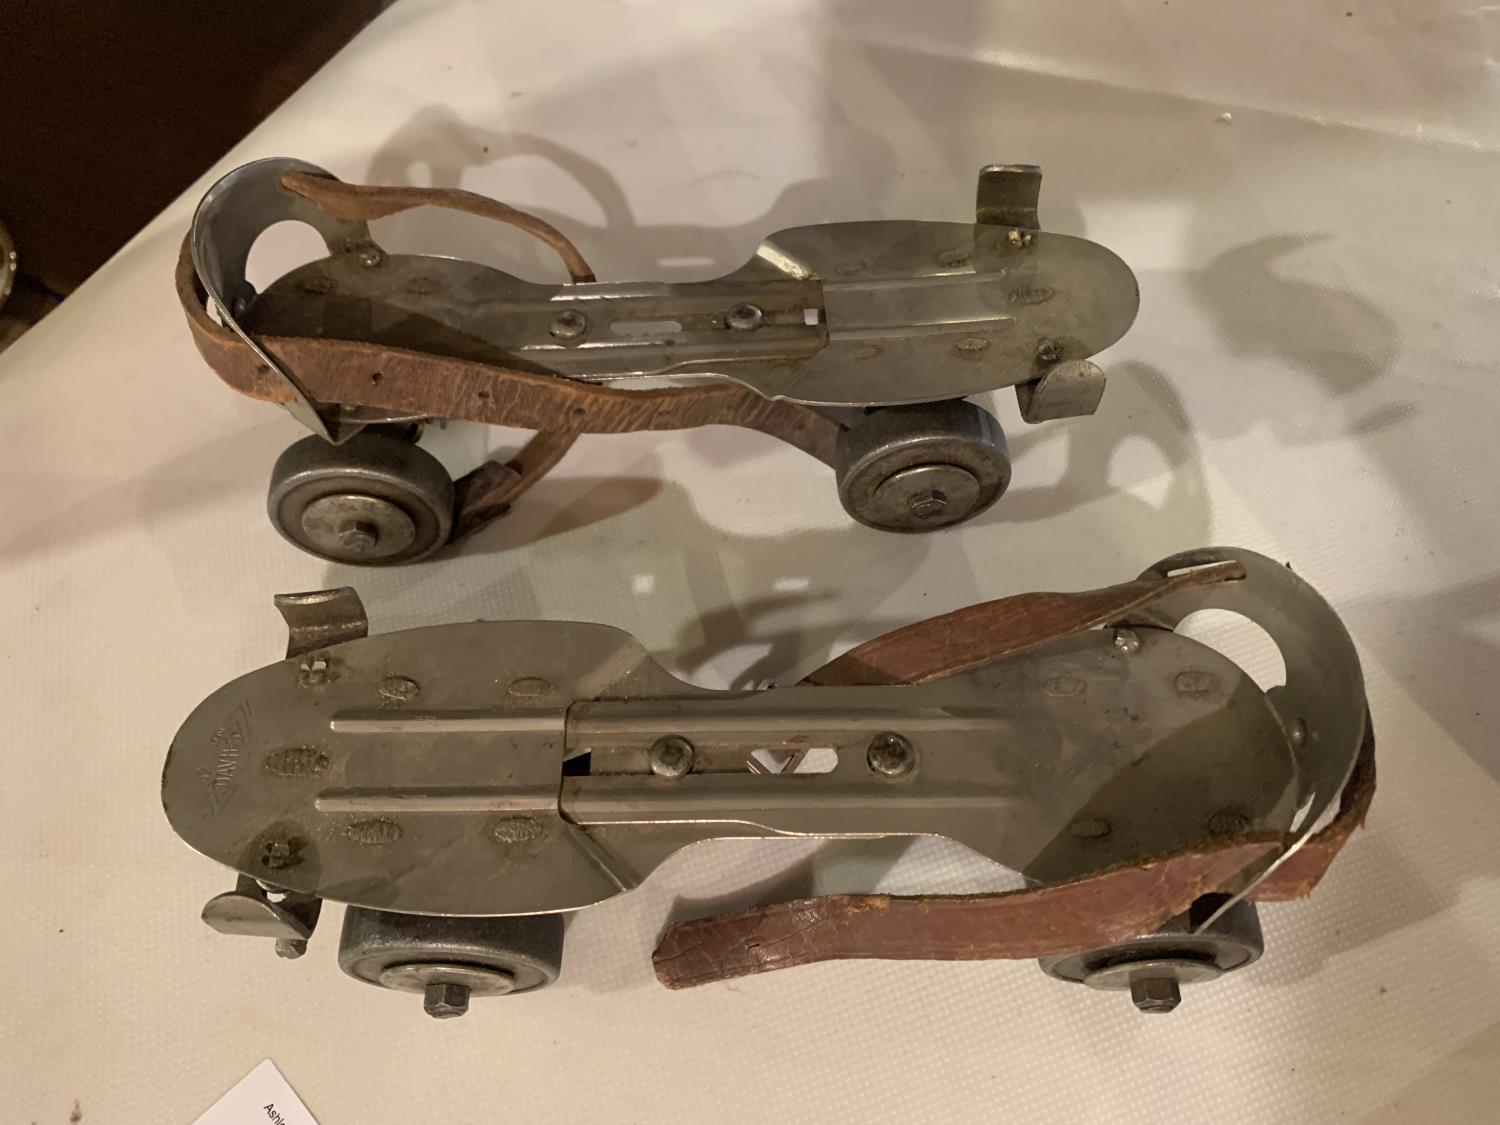 A PAIR OF DAVIES ADJUSTABLE ROLLER SKATES WITH LEATHER STRAPS - Image 2 of 2